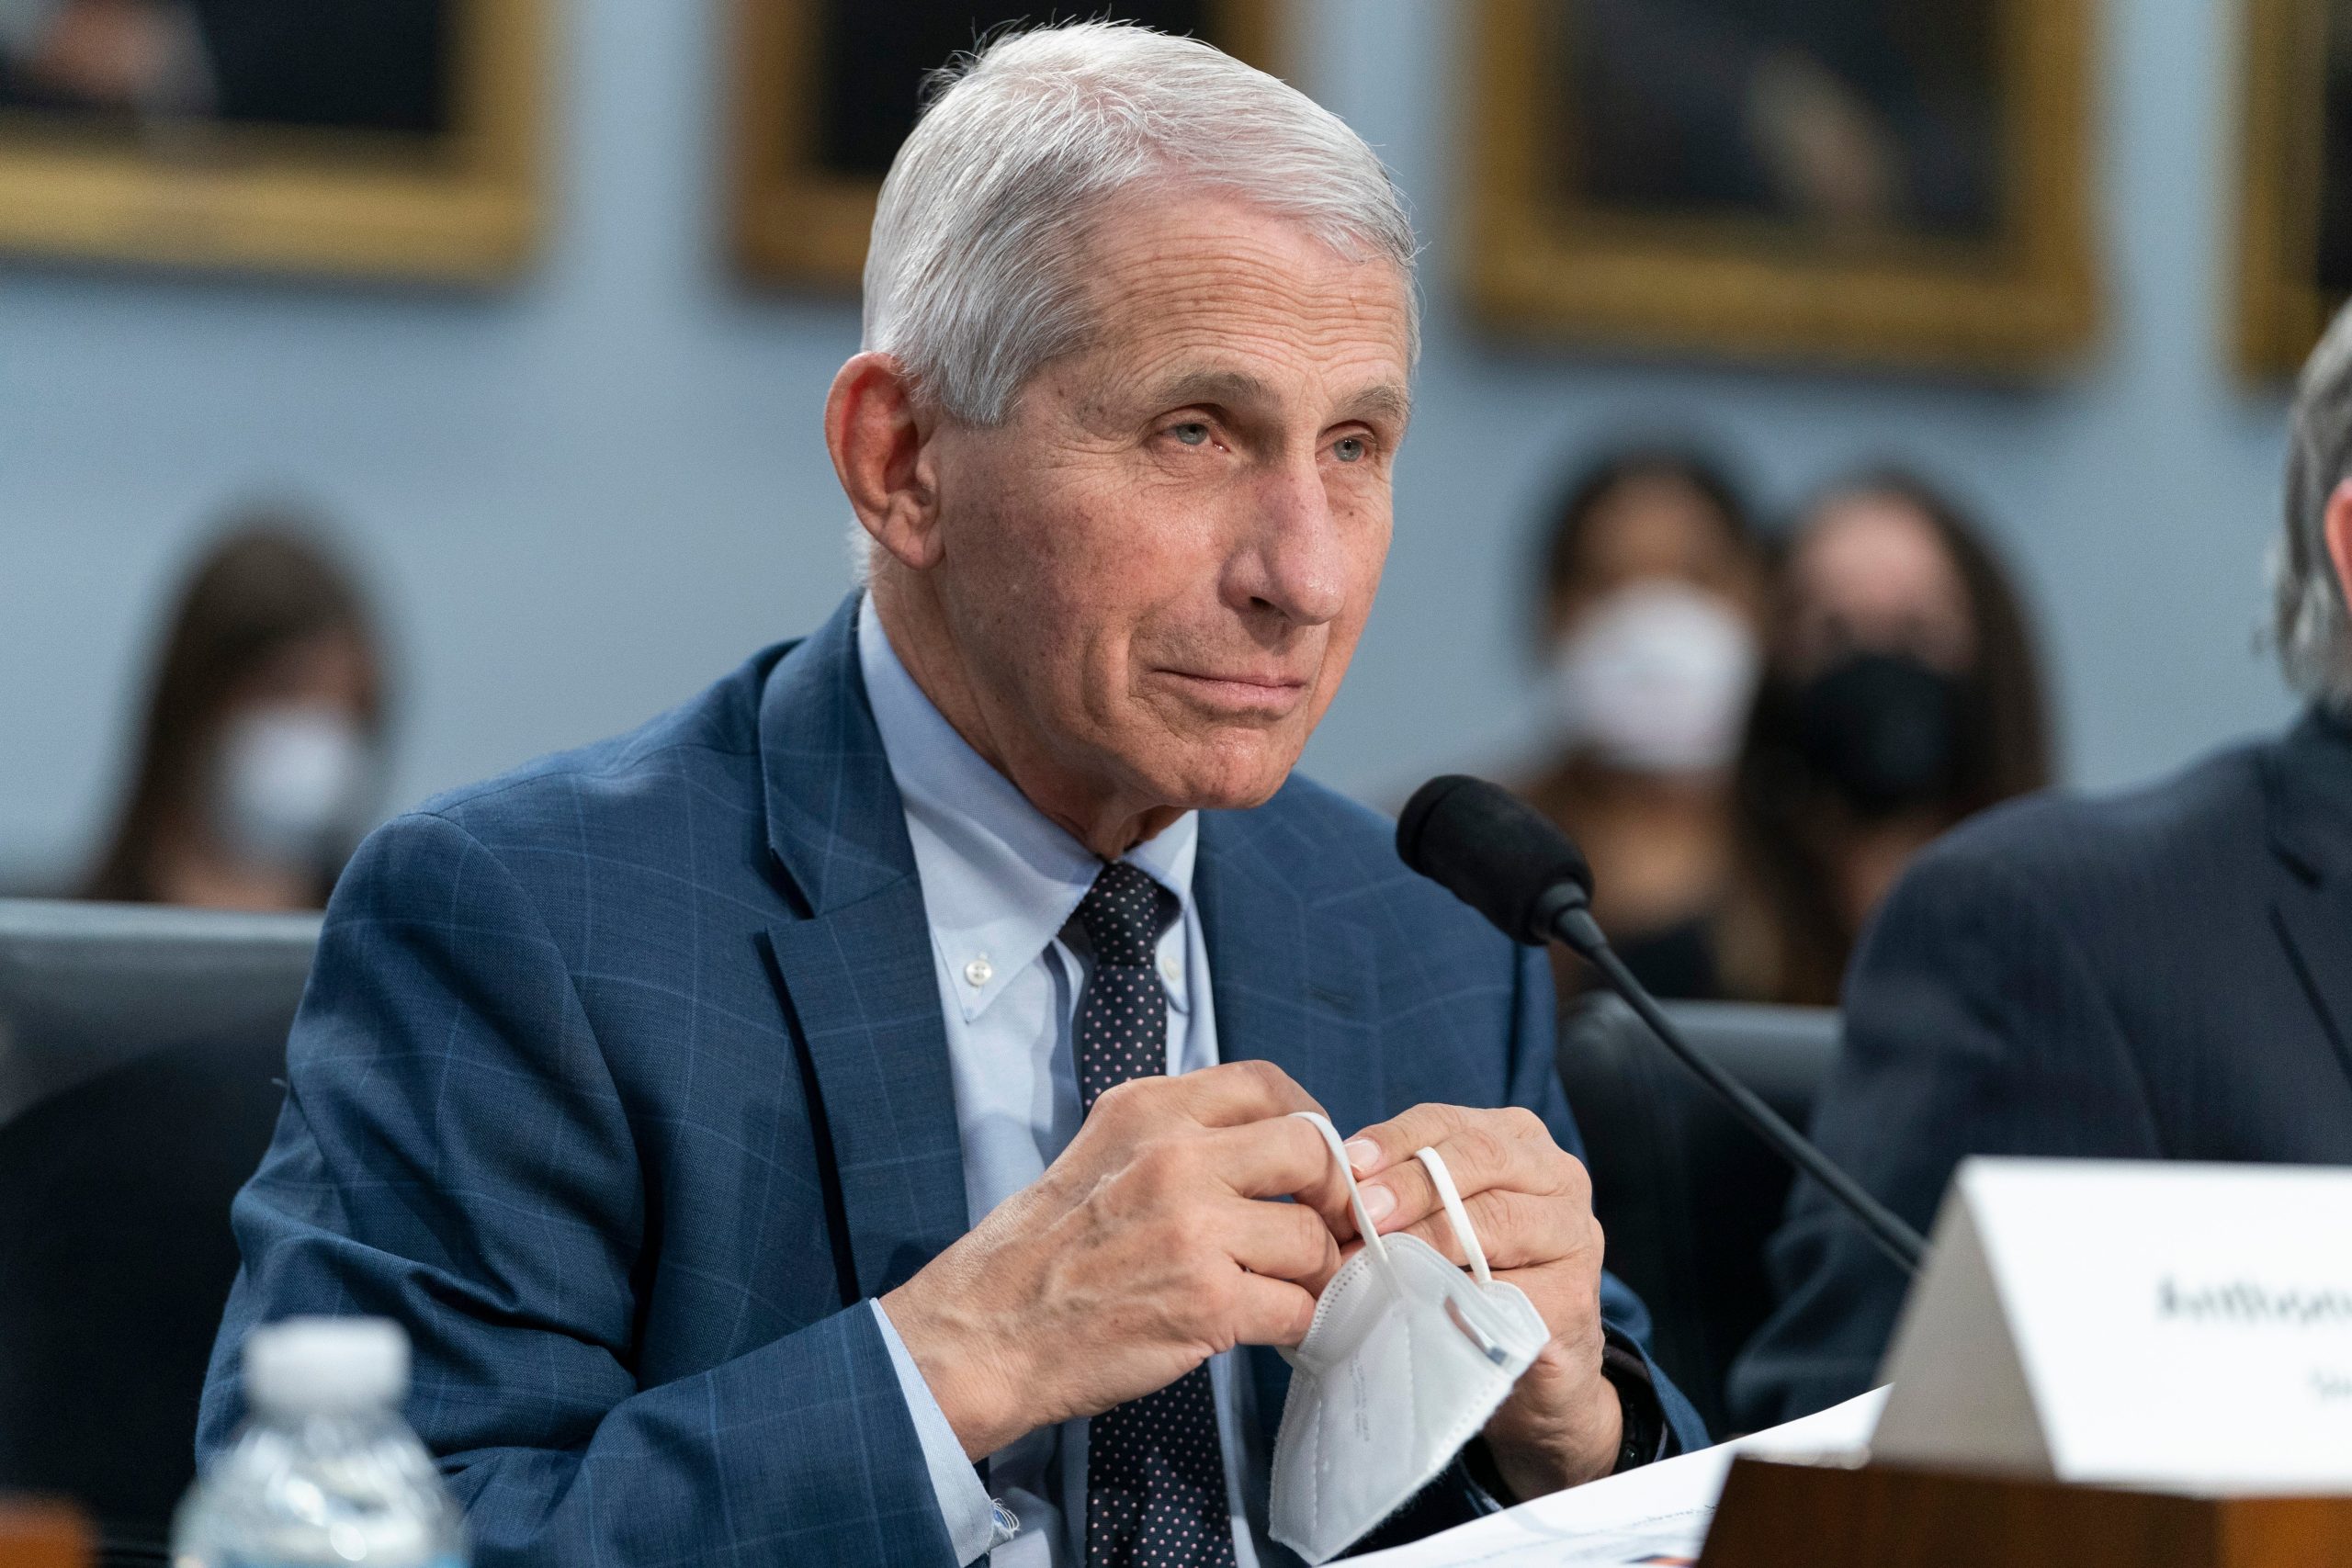 Fauci to testify publicly for first time since retirement [Video]